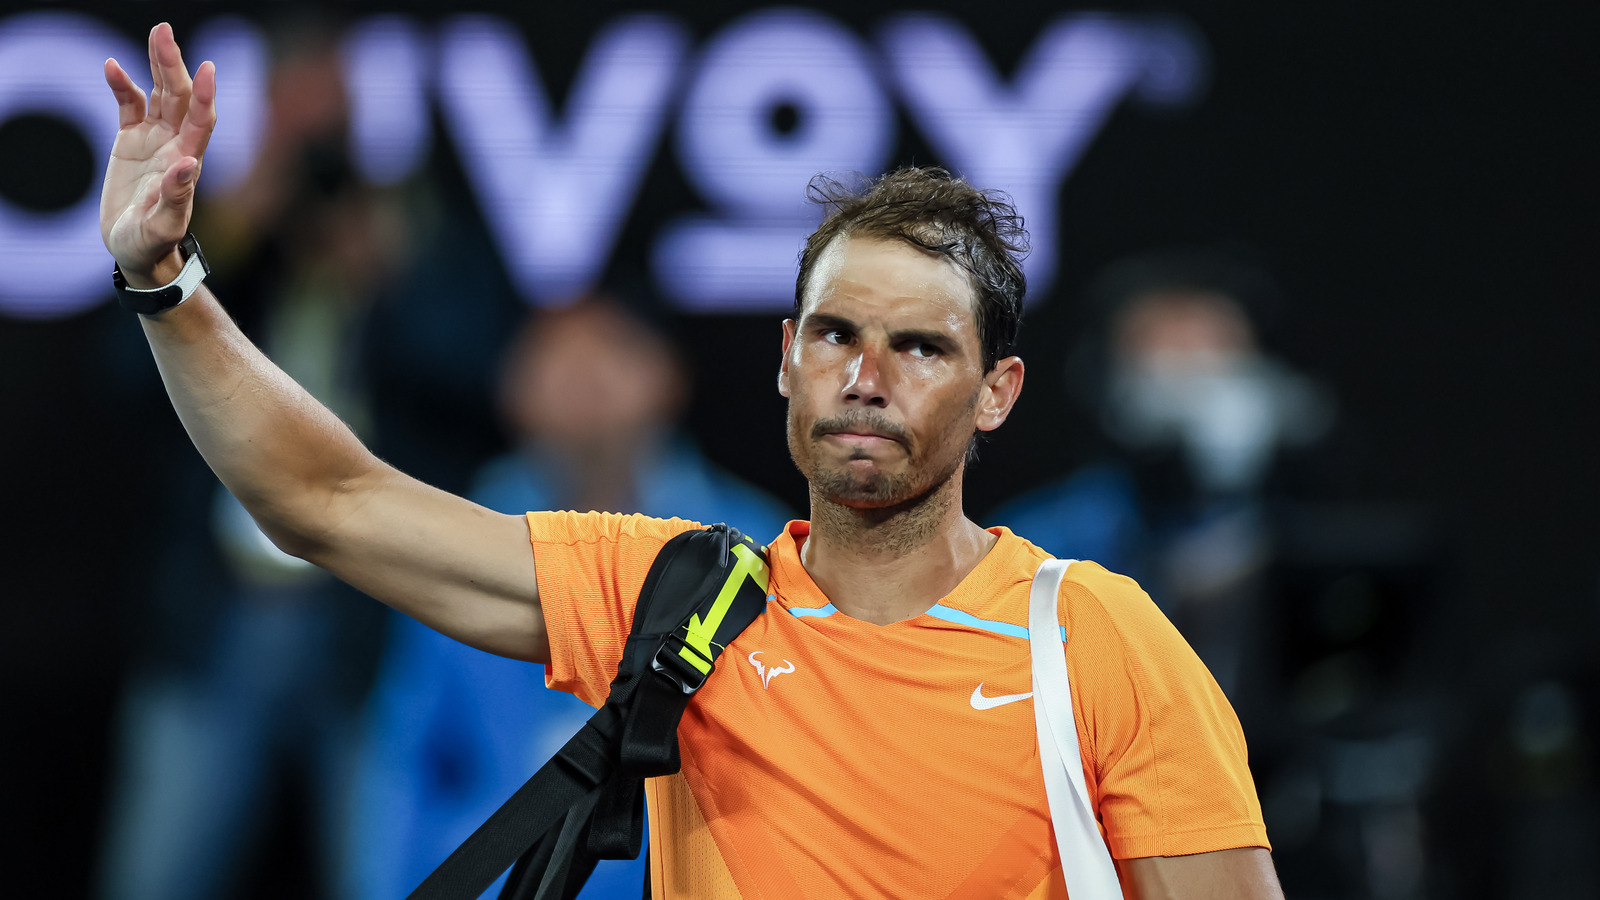 'He’s a guy who won 14 times here,' Andy Roddick still feels like Rafael Nadal will be the favorite at 2024 Roland Garros despite injury struggles